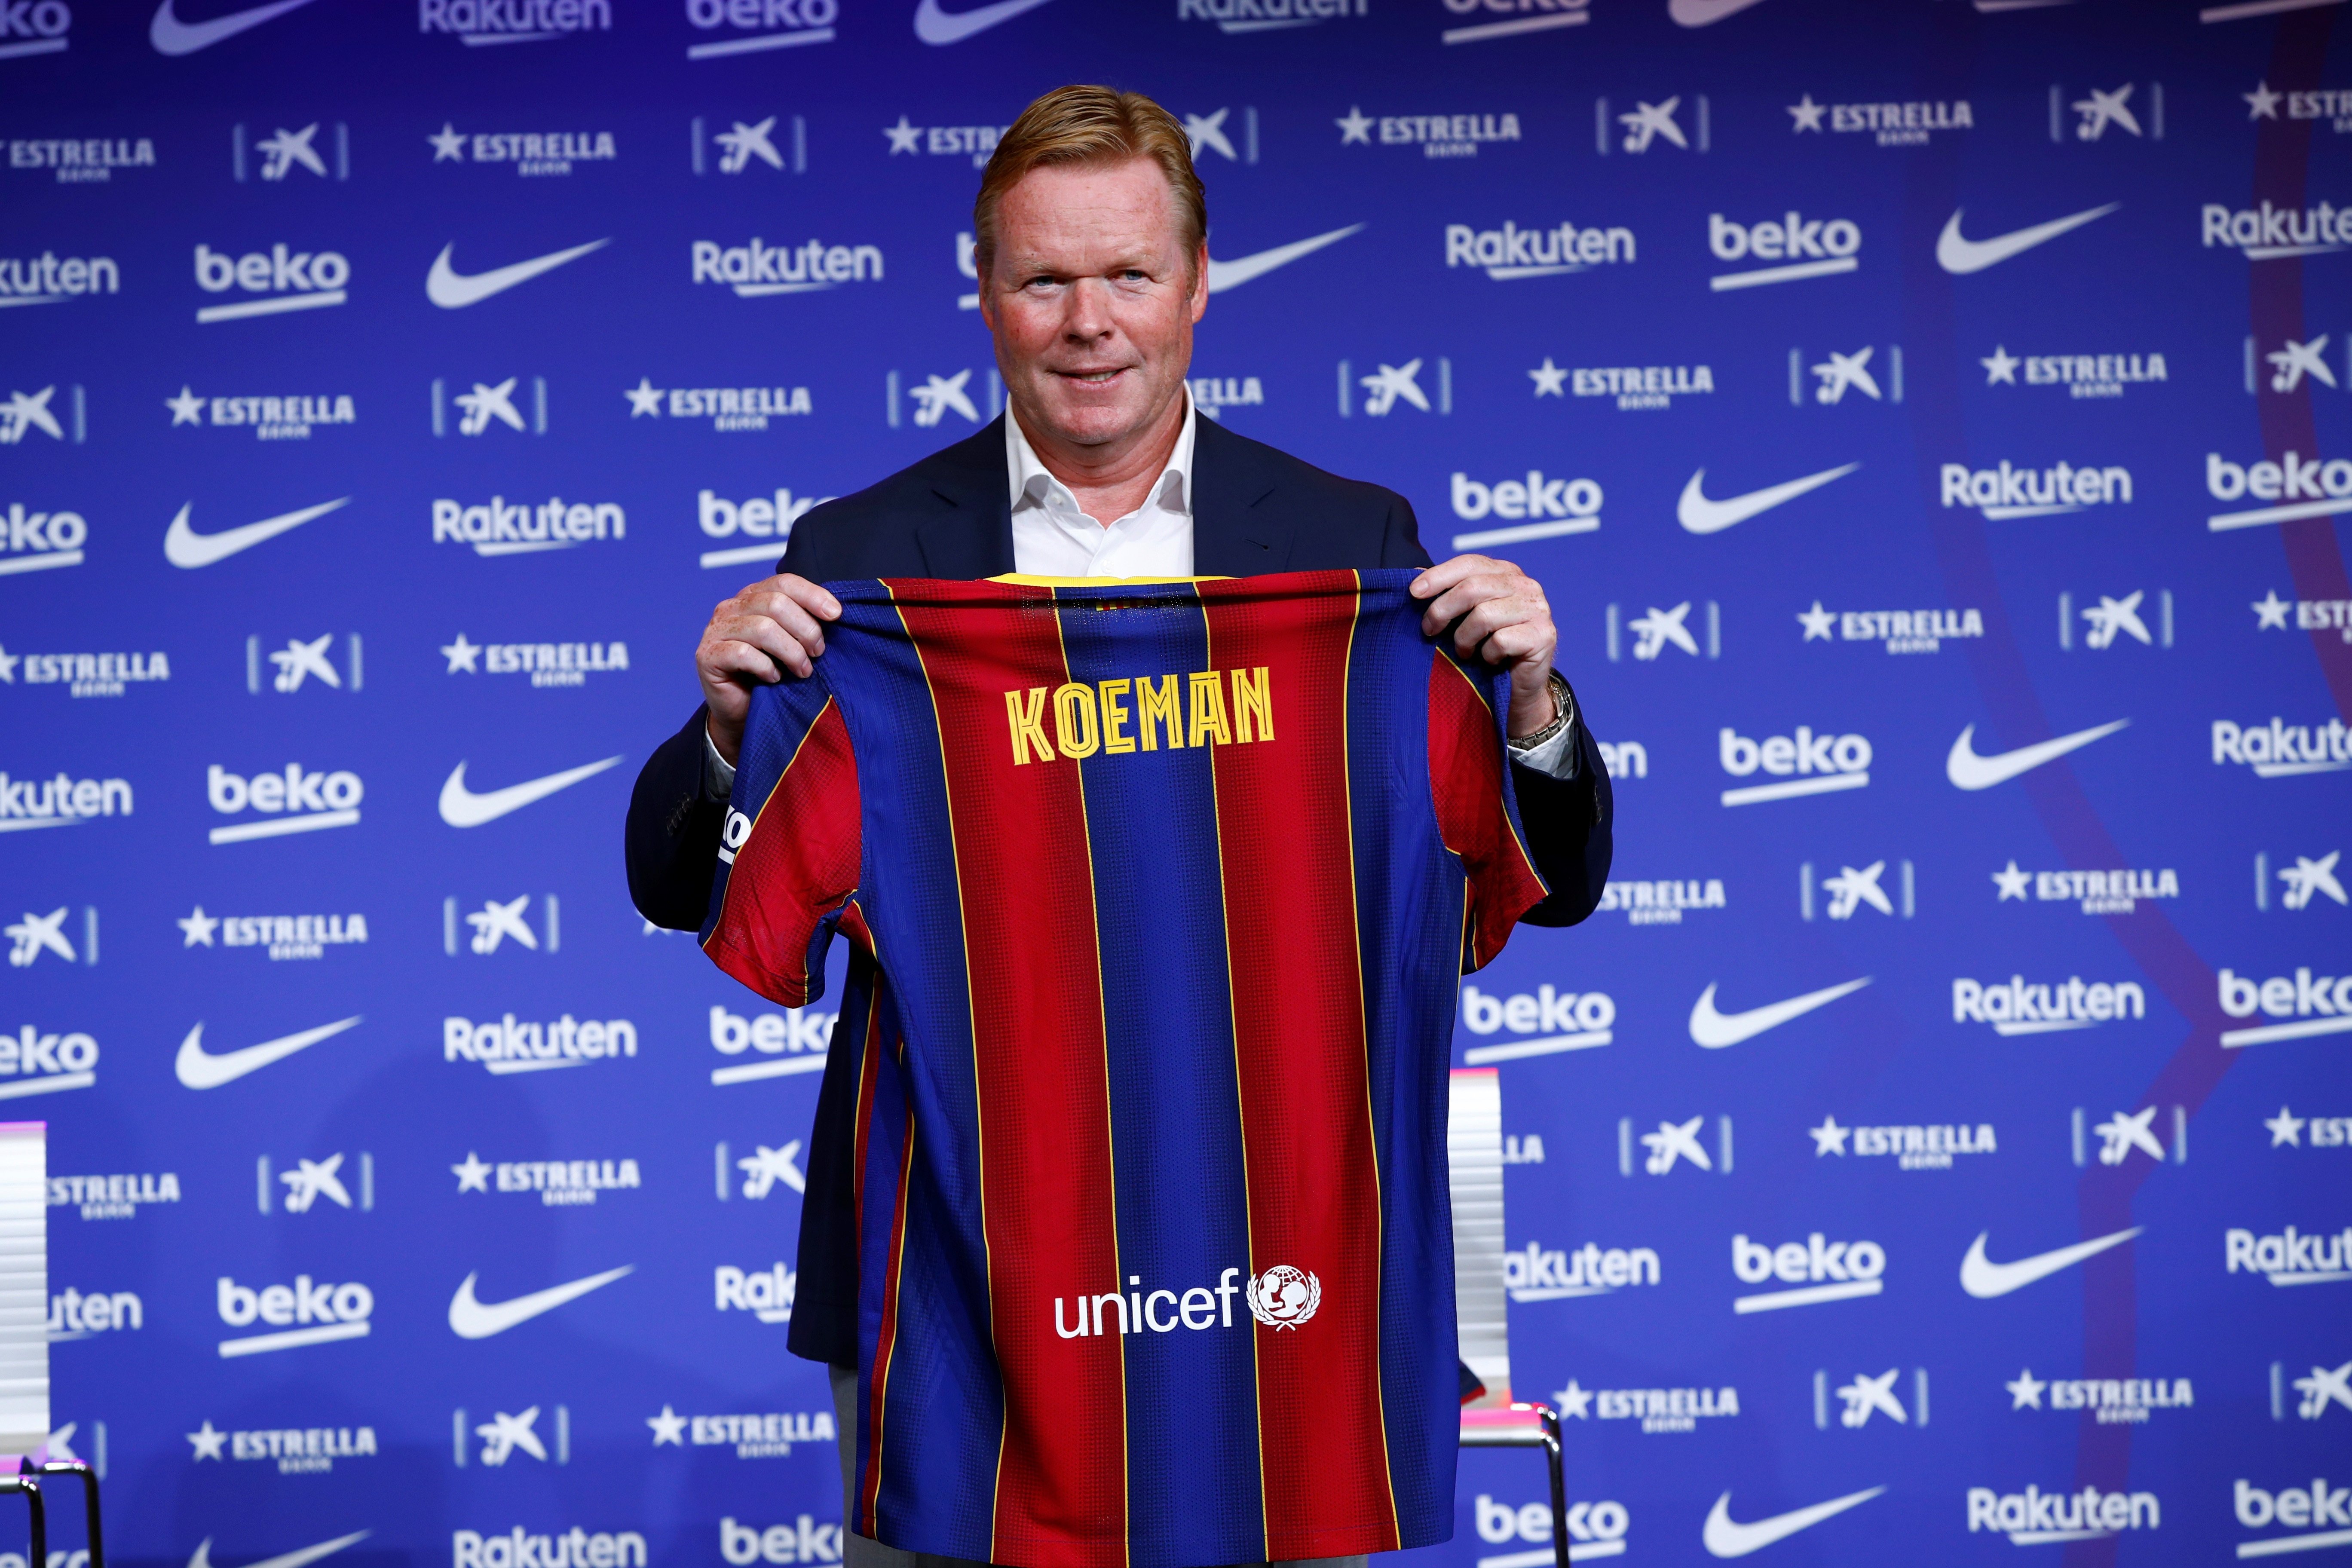 The Koeman doctrine: Barça's new coach speaks about his rules and the role of Messi